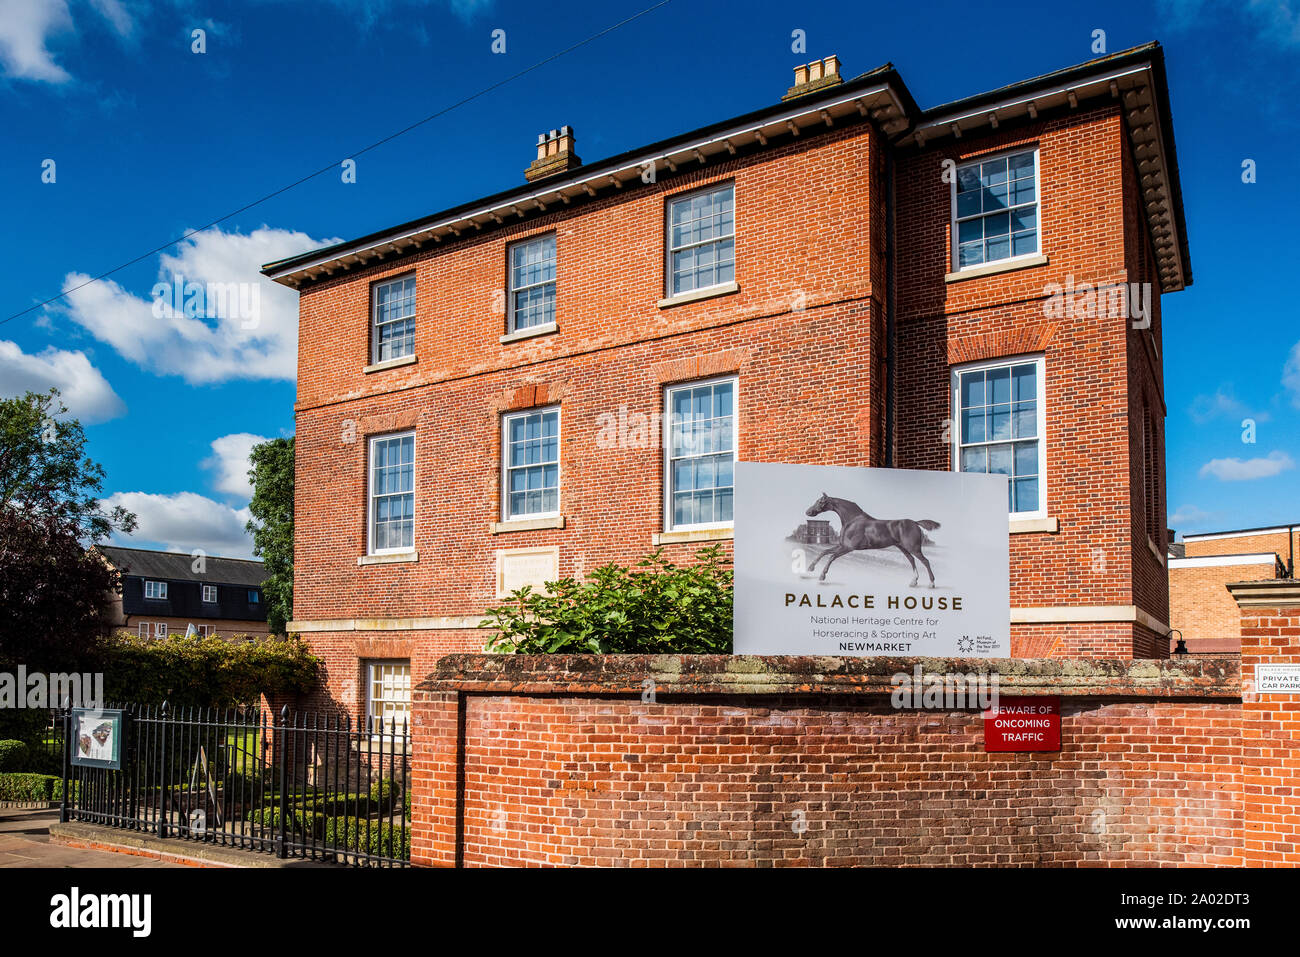 Palace House Newmarket. National Heritage Centre for Horseracing & Sporting Art, parte del palazzo sportivo di Carlo II (Arch: William Samwell 1671). Foto Stock